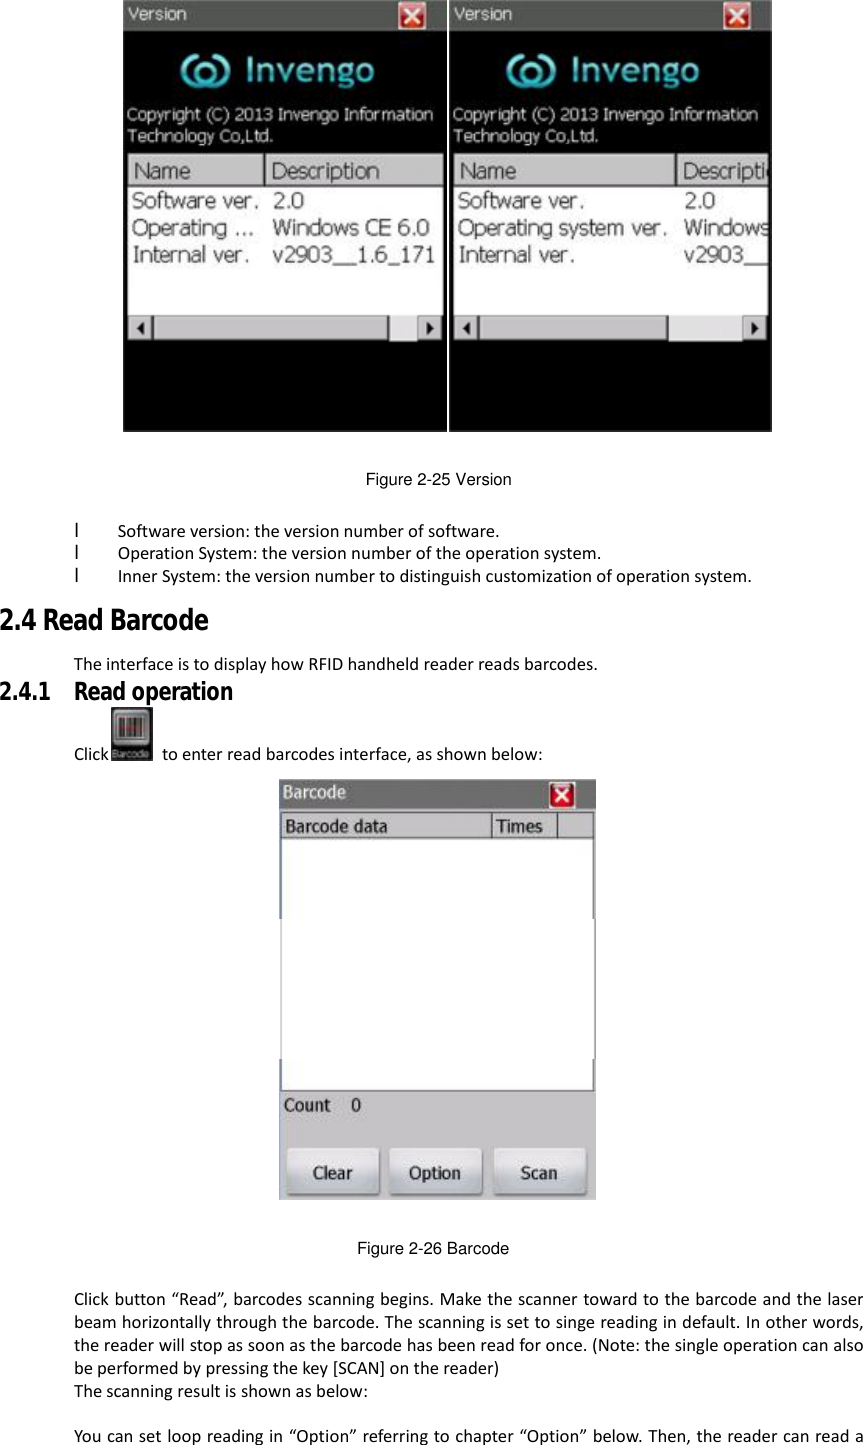   Figure 2-25 Version  l Software version: the version number of software. l Operation System: the version number of the operation system. l Inner System: the version number to distinguish customization of operation system. 2.4 Read Barcode The interface is to display how RFID handheld reader reads barcodes. 2.4.1 Read operation Click  to enter read barcodes interface, as shown below:  Figure 2-26 Barcode  Click button “Read”, barcodes scanning begins. Make the scanner toward to the barcode and the laser beam horizontally through the barcode. The scanning is set to singe reading in default. In other words, the reader will stop as soon as the barcode has been read for once. (Note: the single operation can also be performed by pressing the key [SCAN] on the reader) The scanning result is shown as below:  You can set loop reading in “Option” referring to chapter “Option” below. Then, the reader can read a 